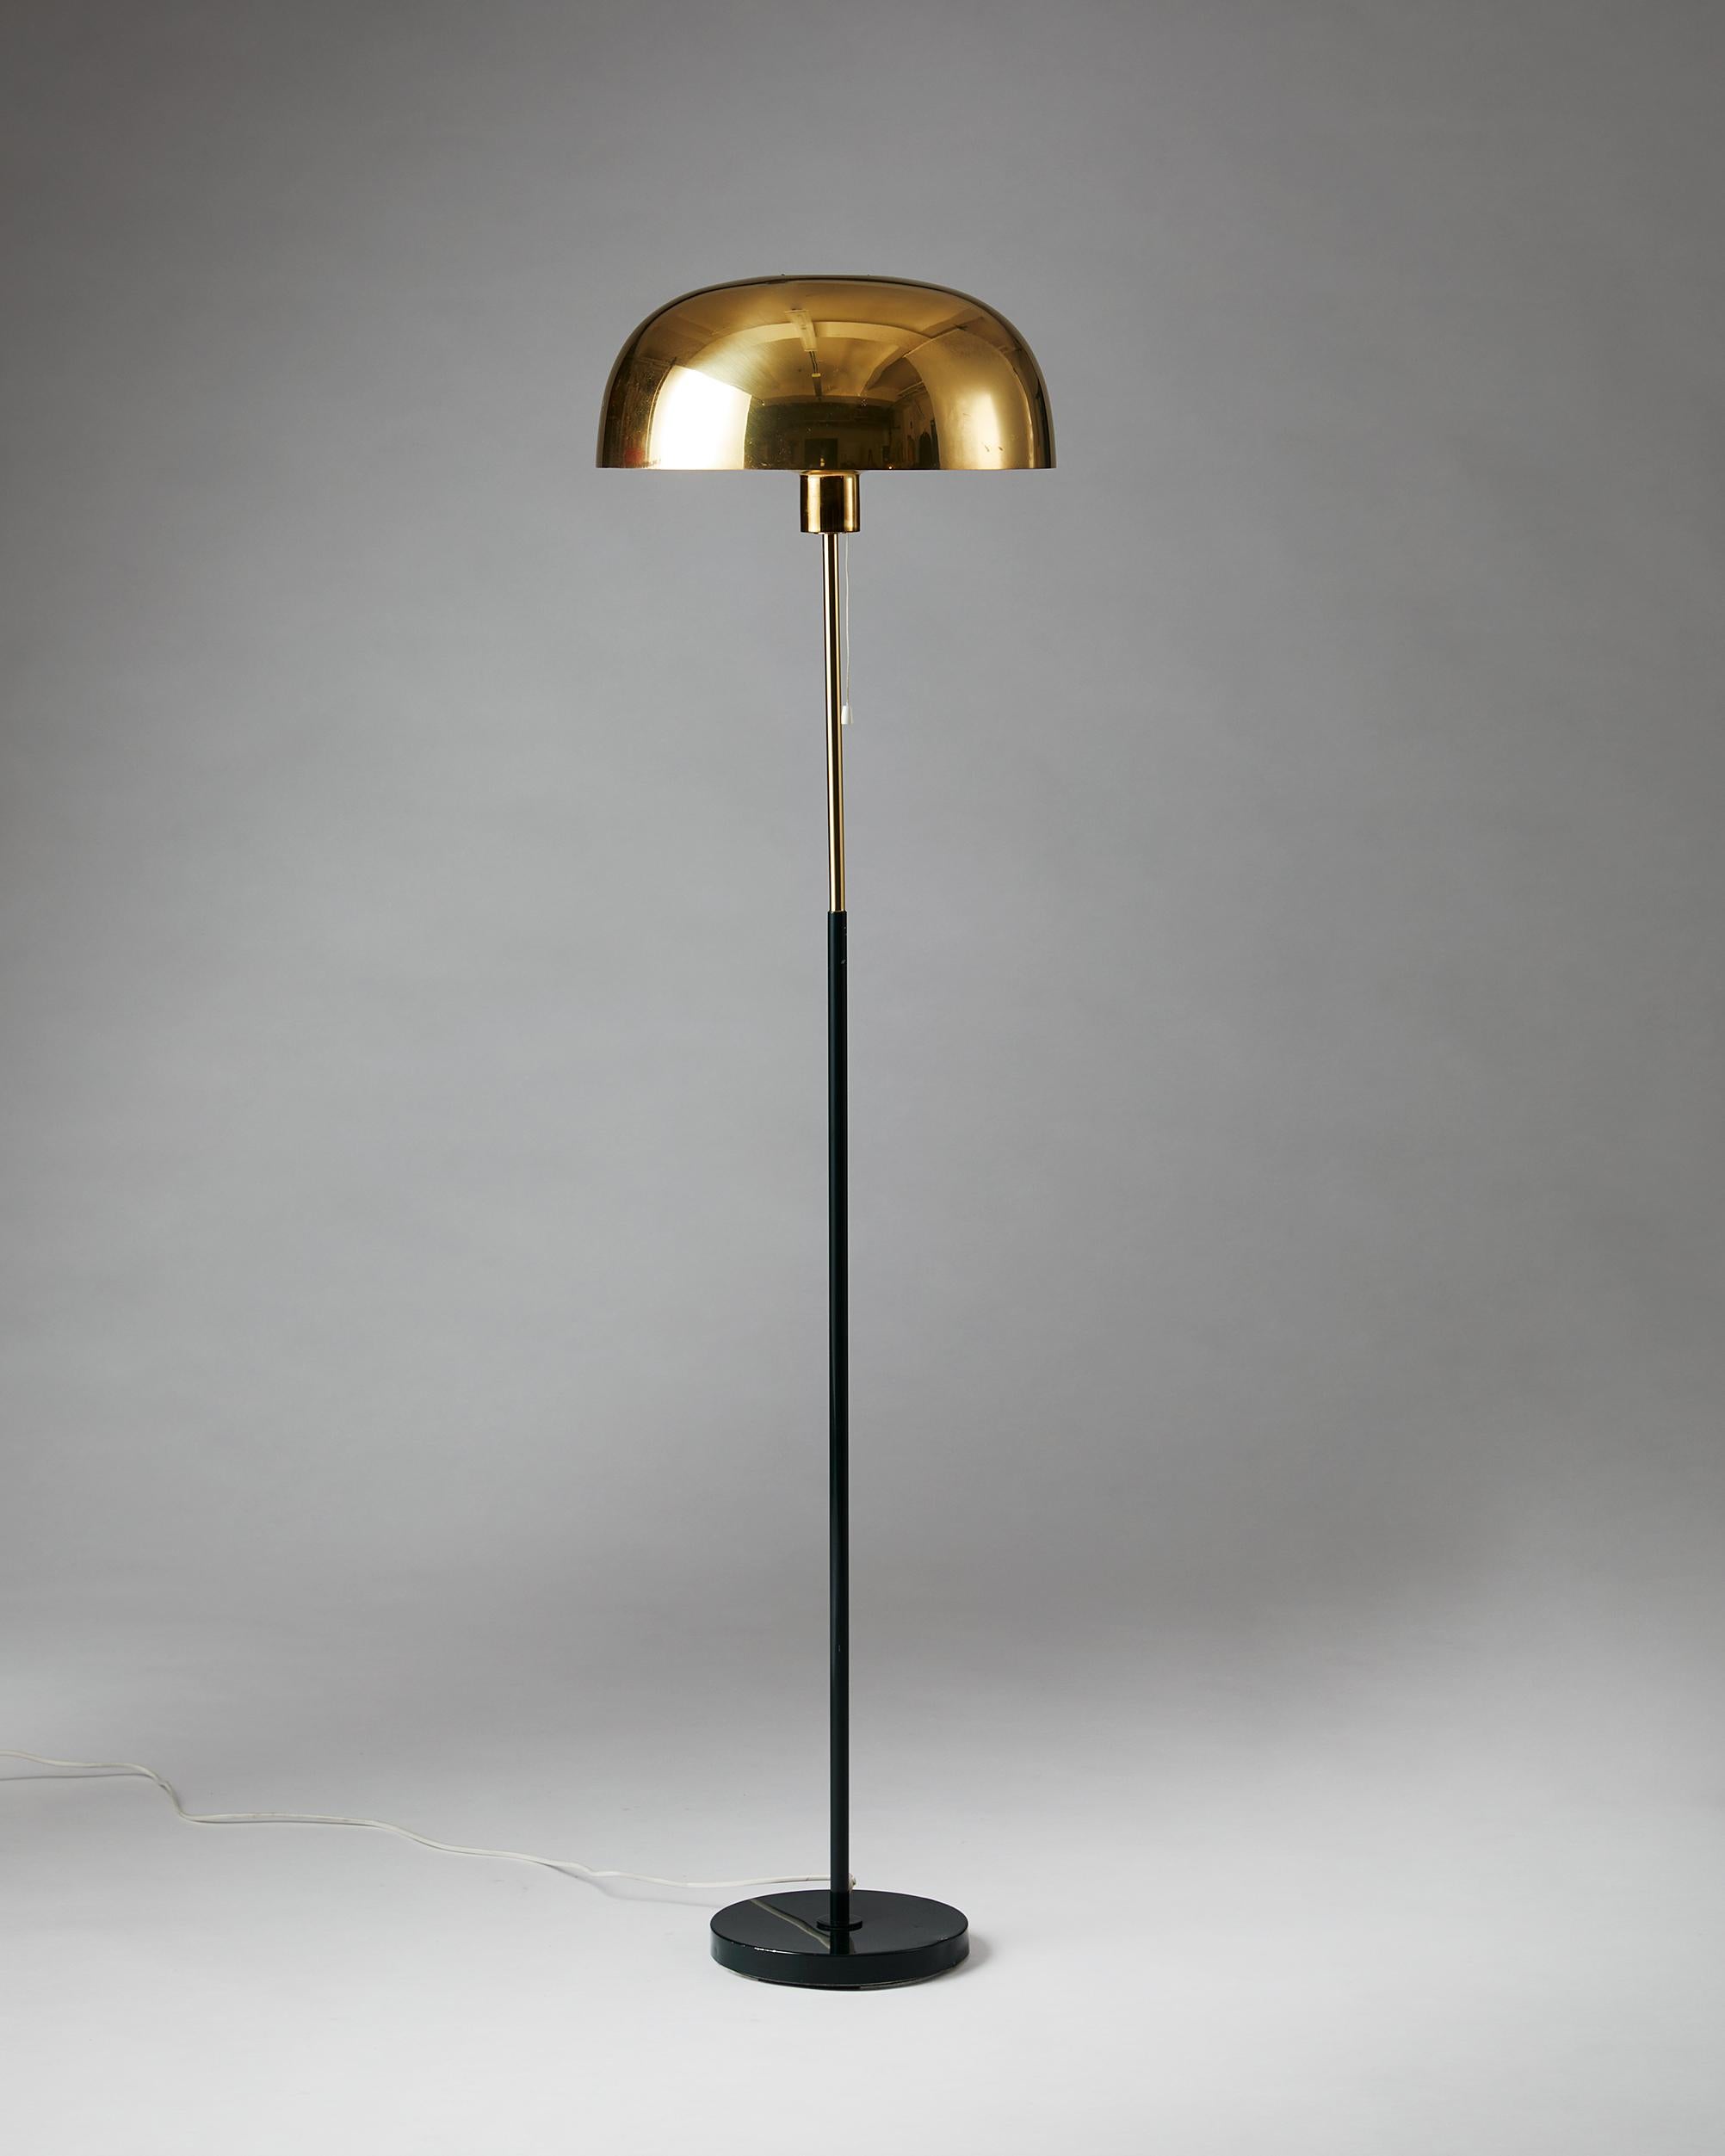 Brass and lacquered brass.

Measures: H 140 cm / 4' 7